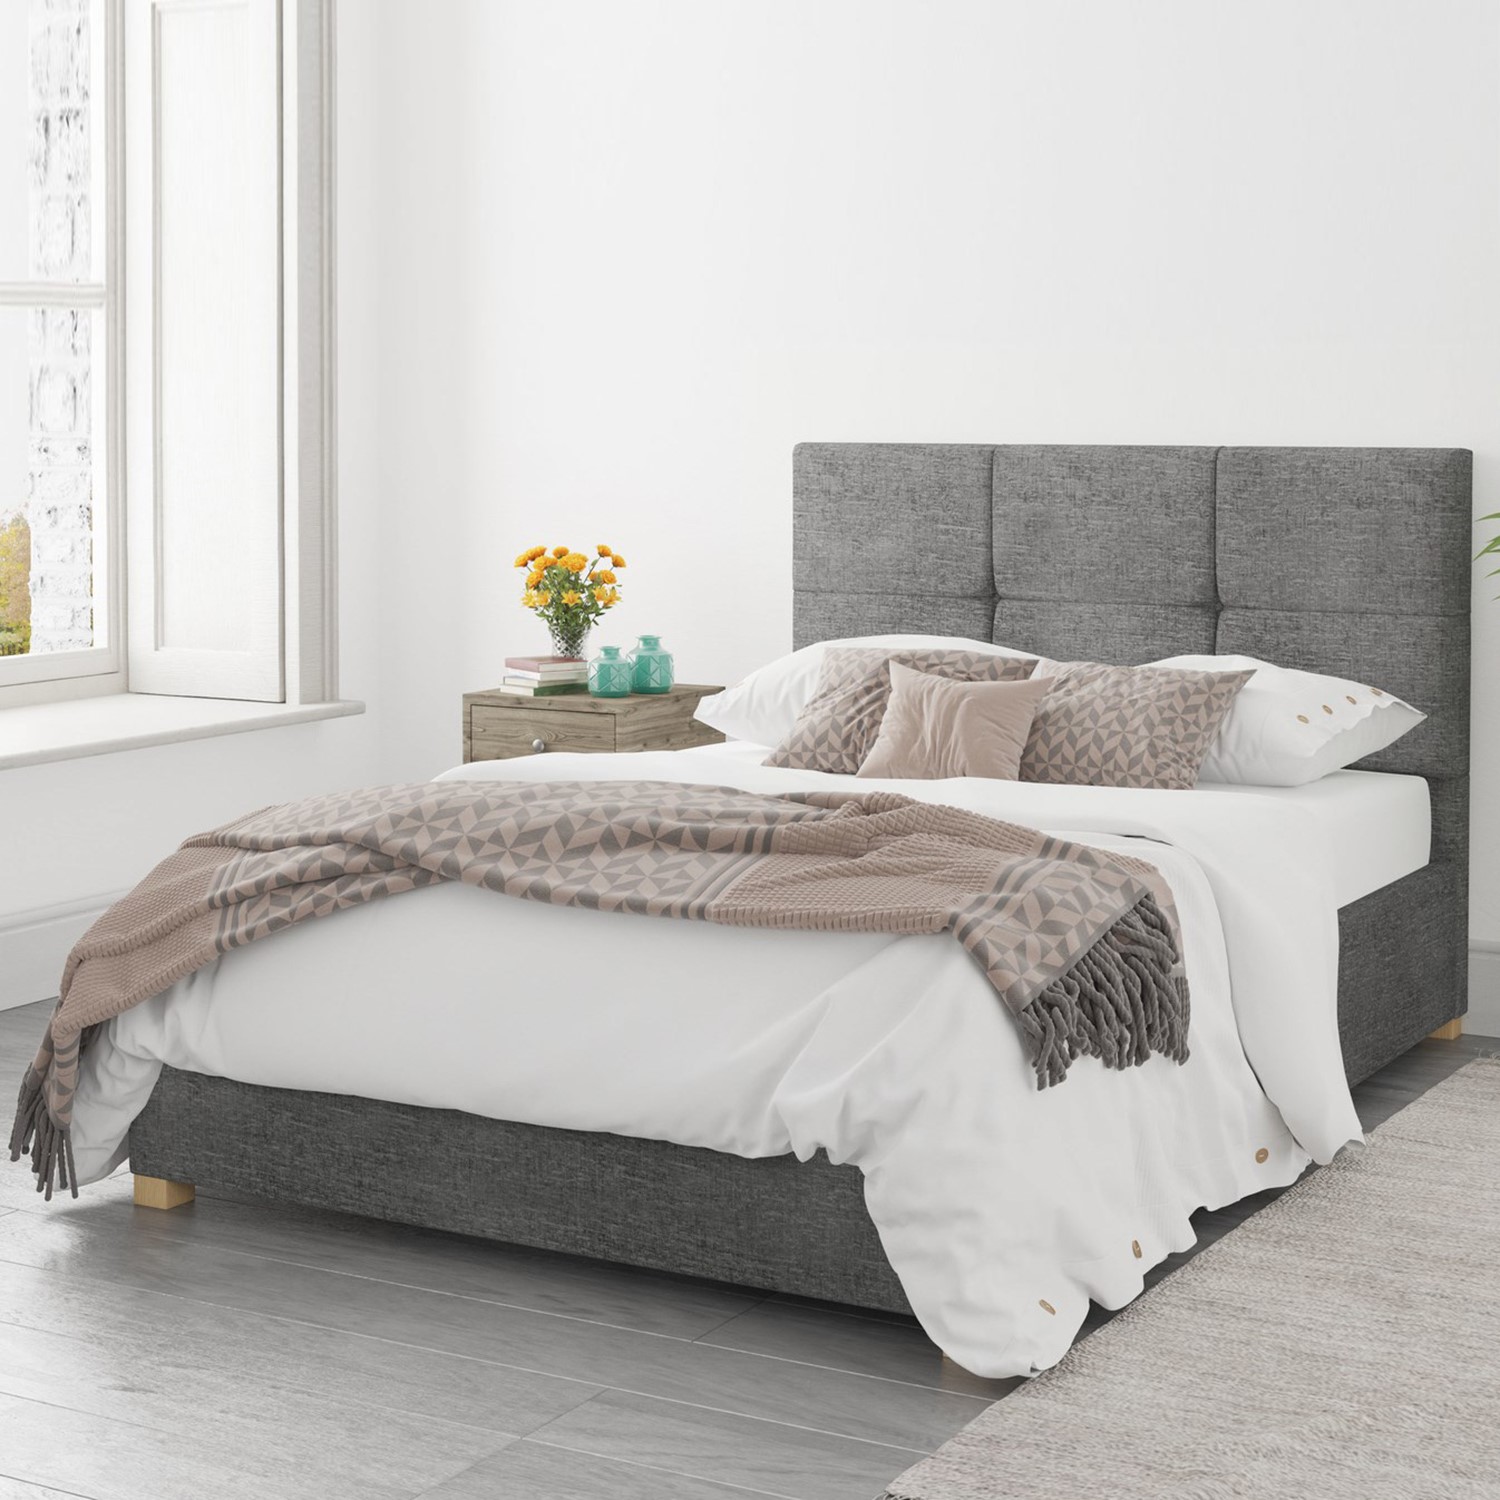 Read more about Grey fabric double ottoman bed farringdon aspire